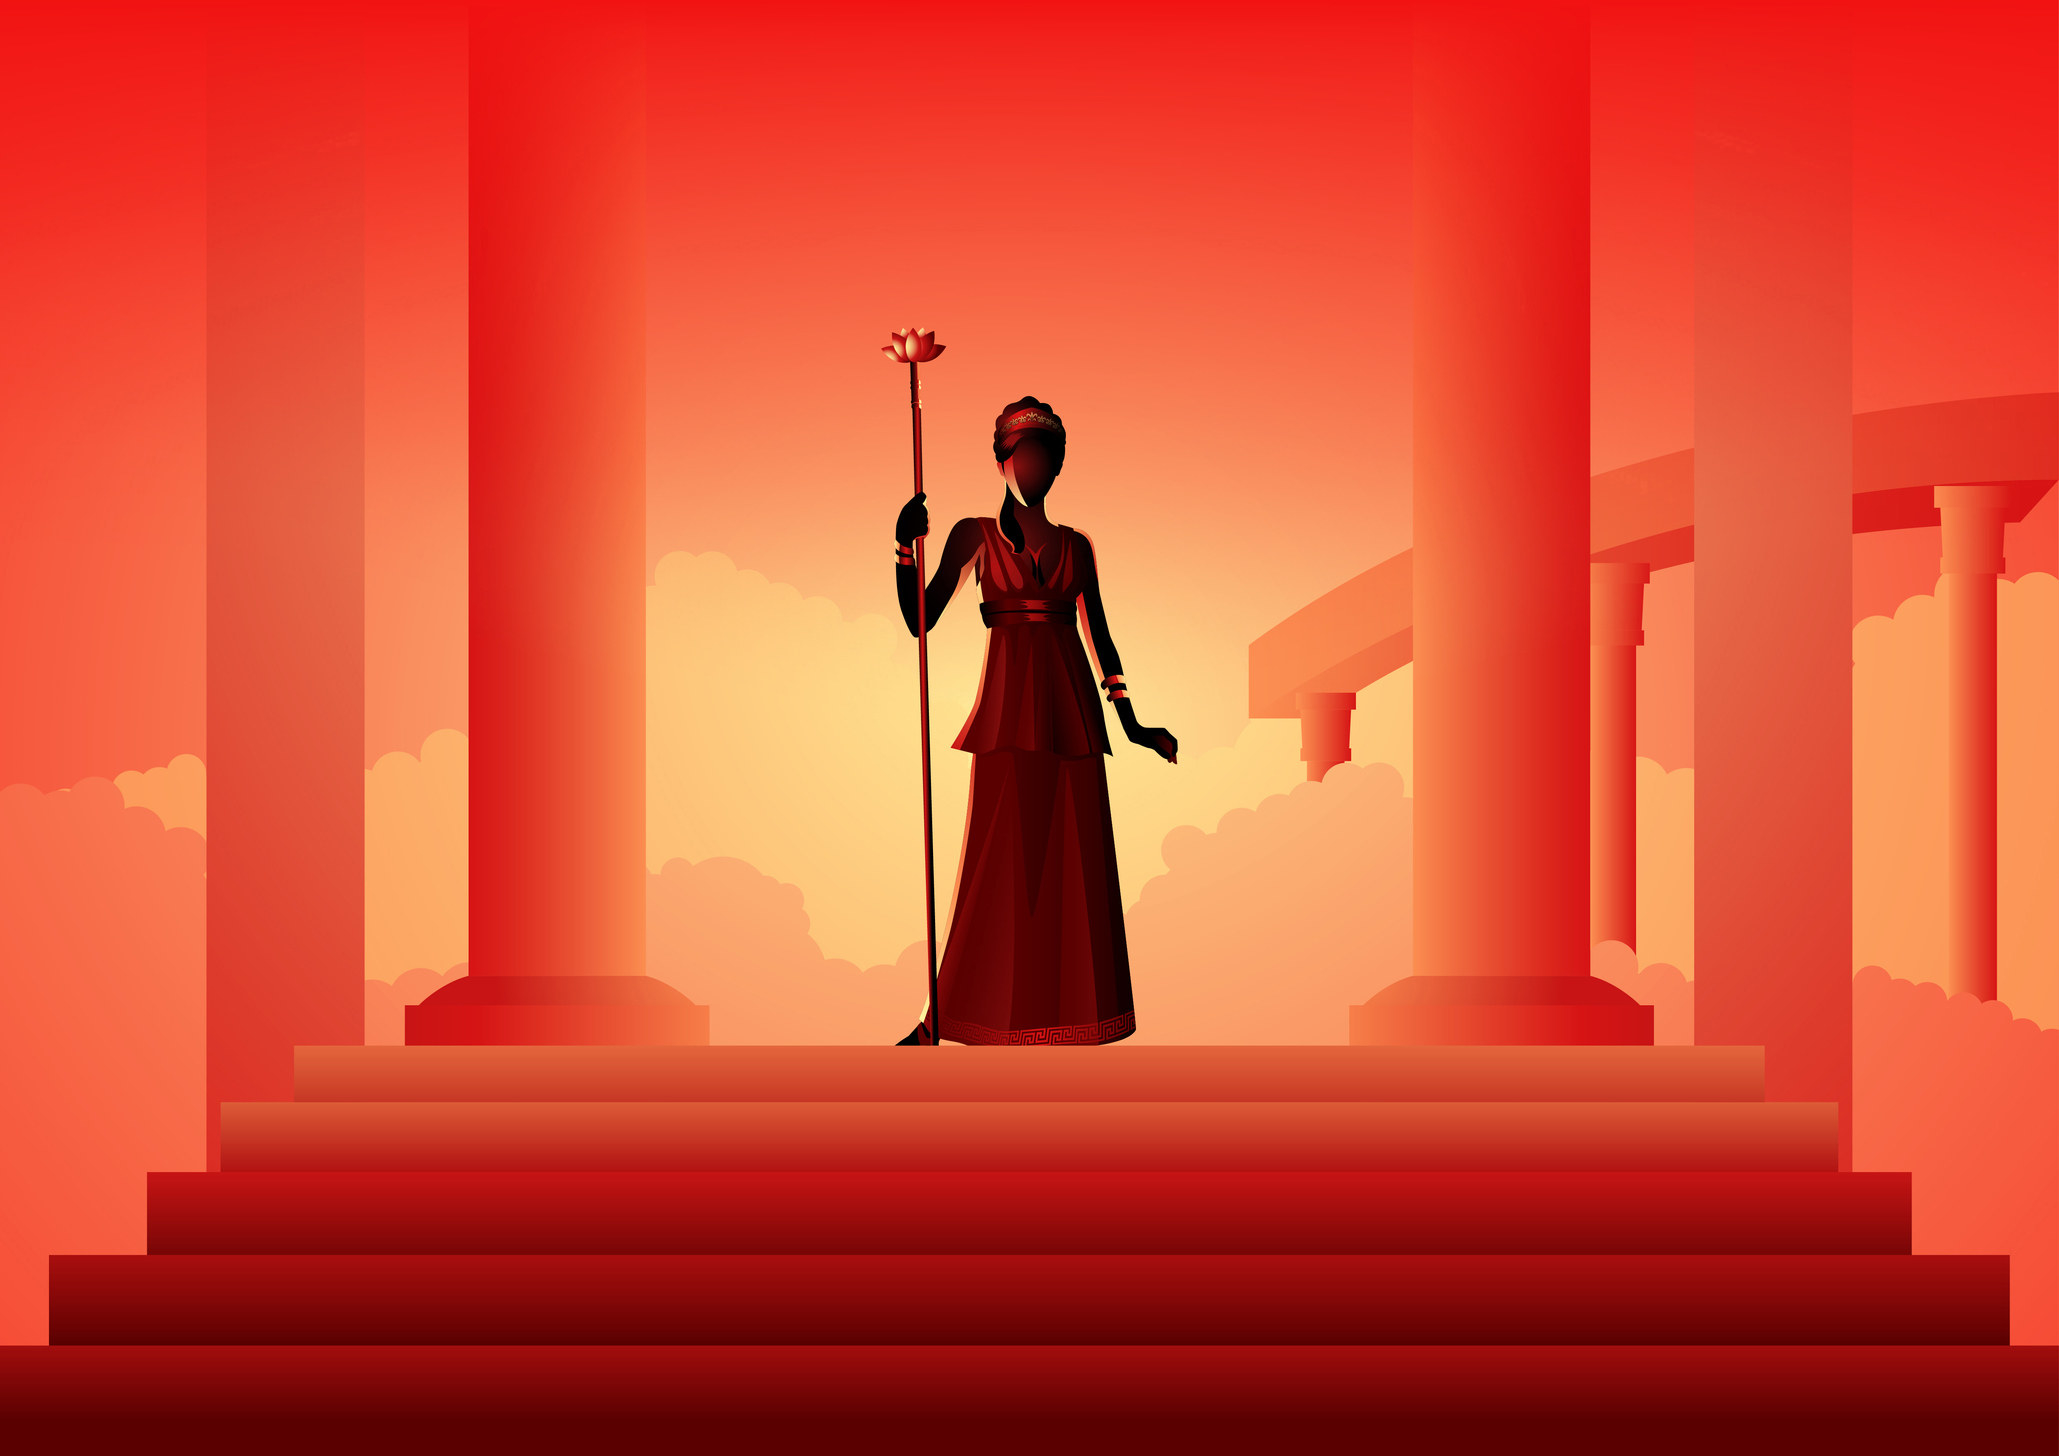 A red and orange tinted image of a goddess stood on some stairs holding a staff, with clouds behind her